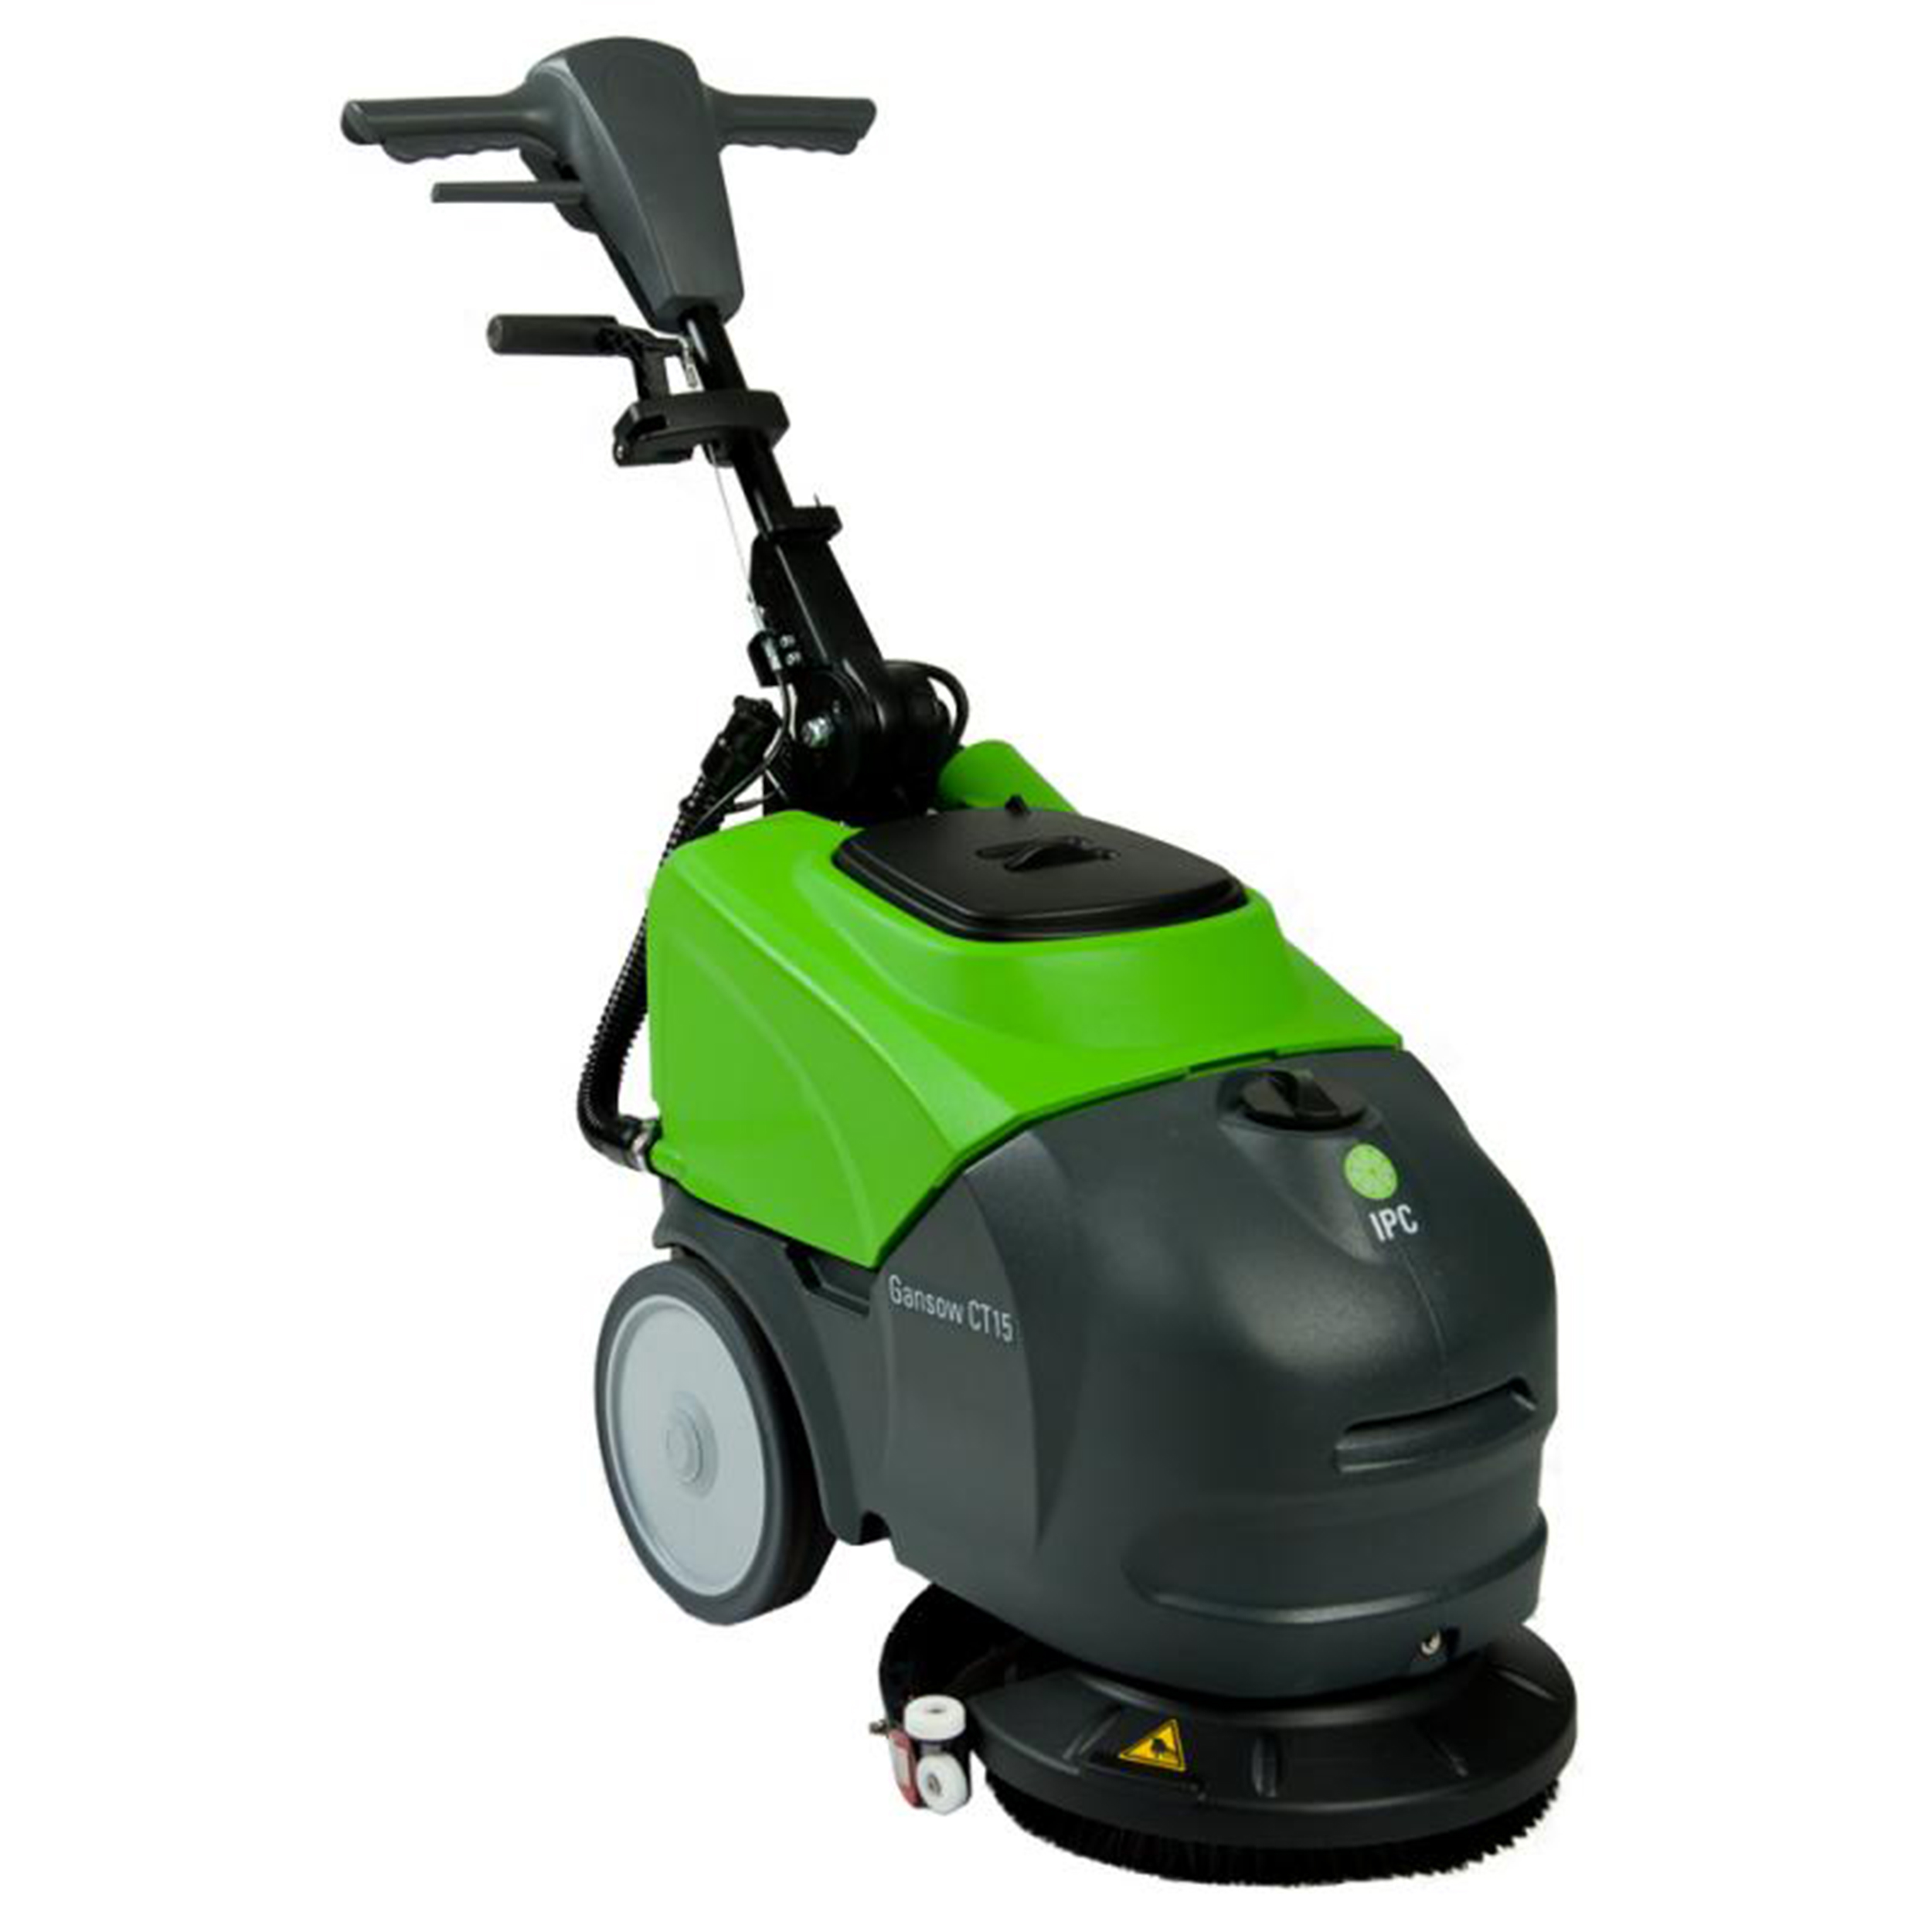 14" Battery Operated Automatic Scrubber With On-board Charger, Model Ct15-b